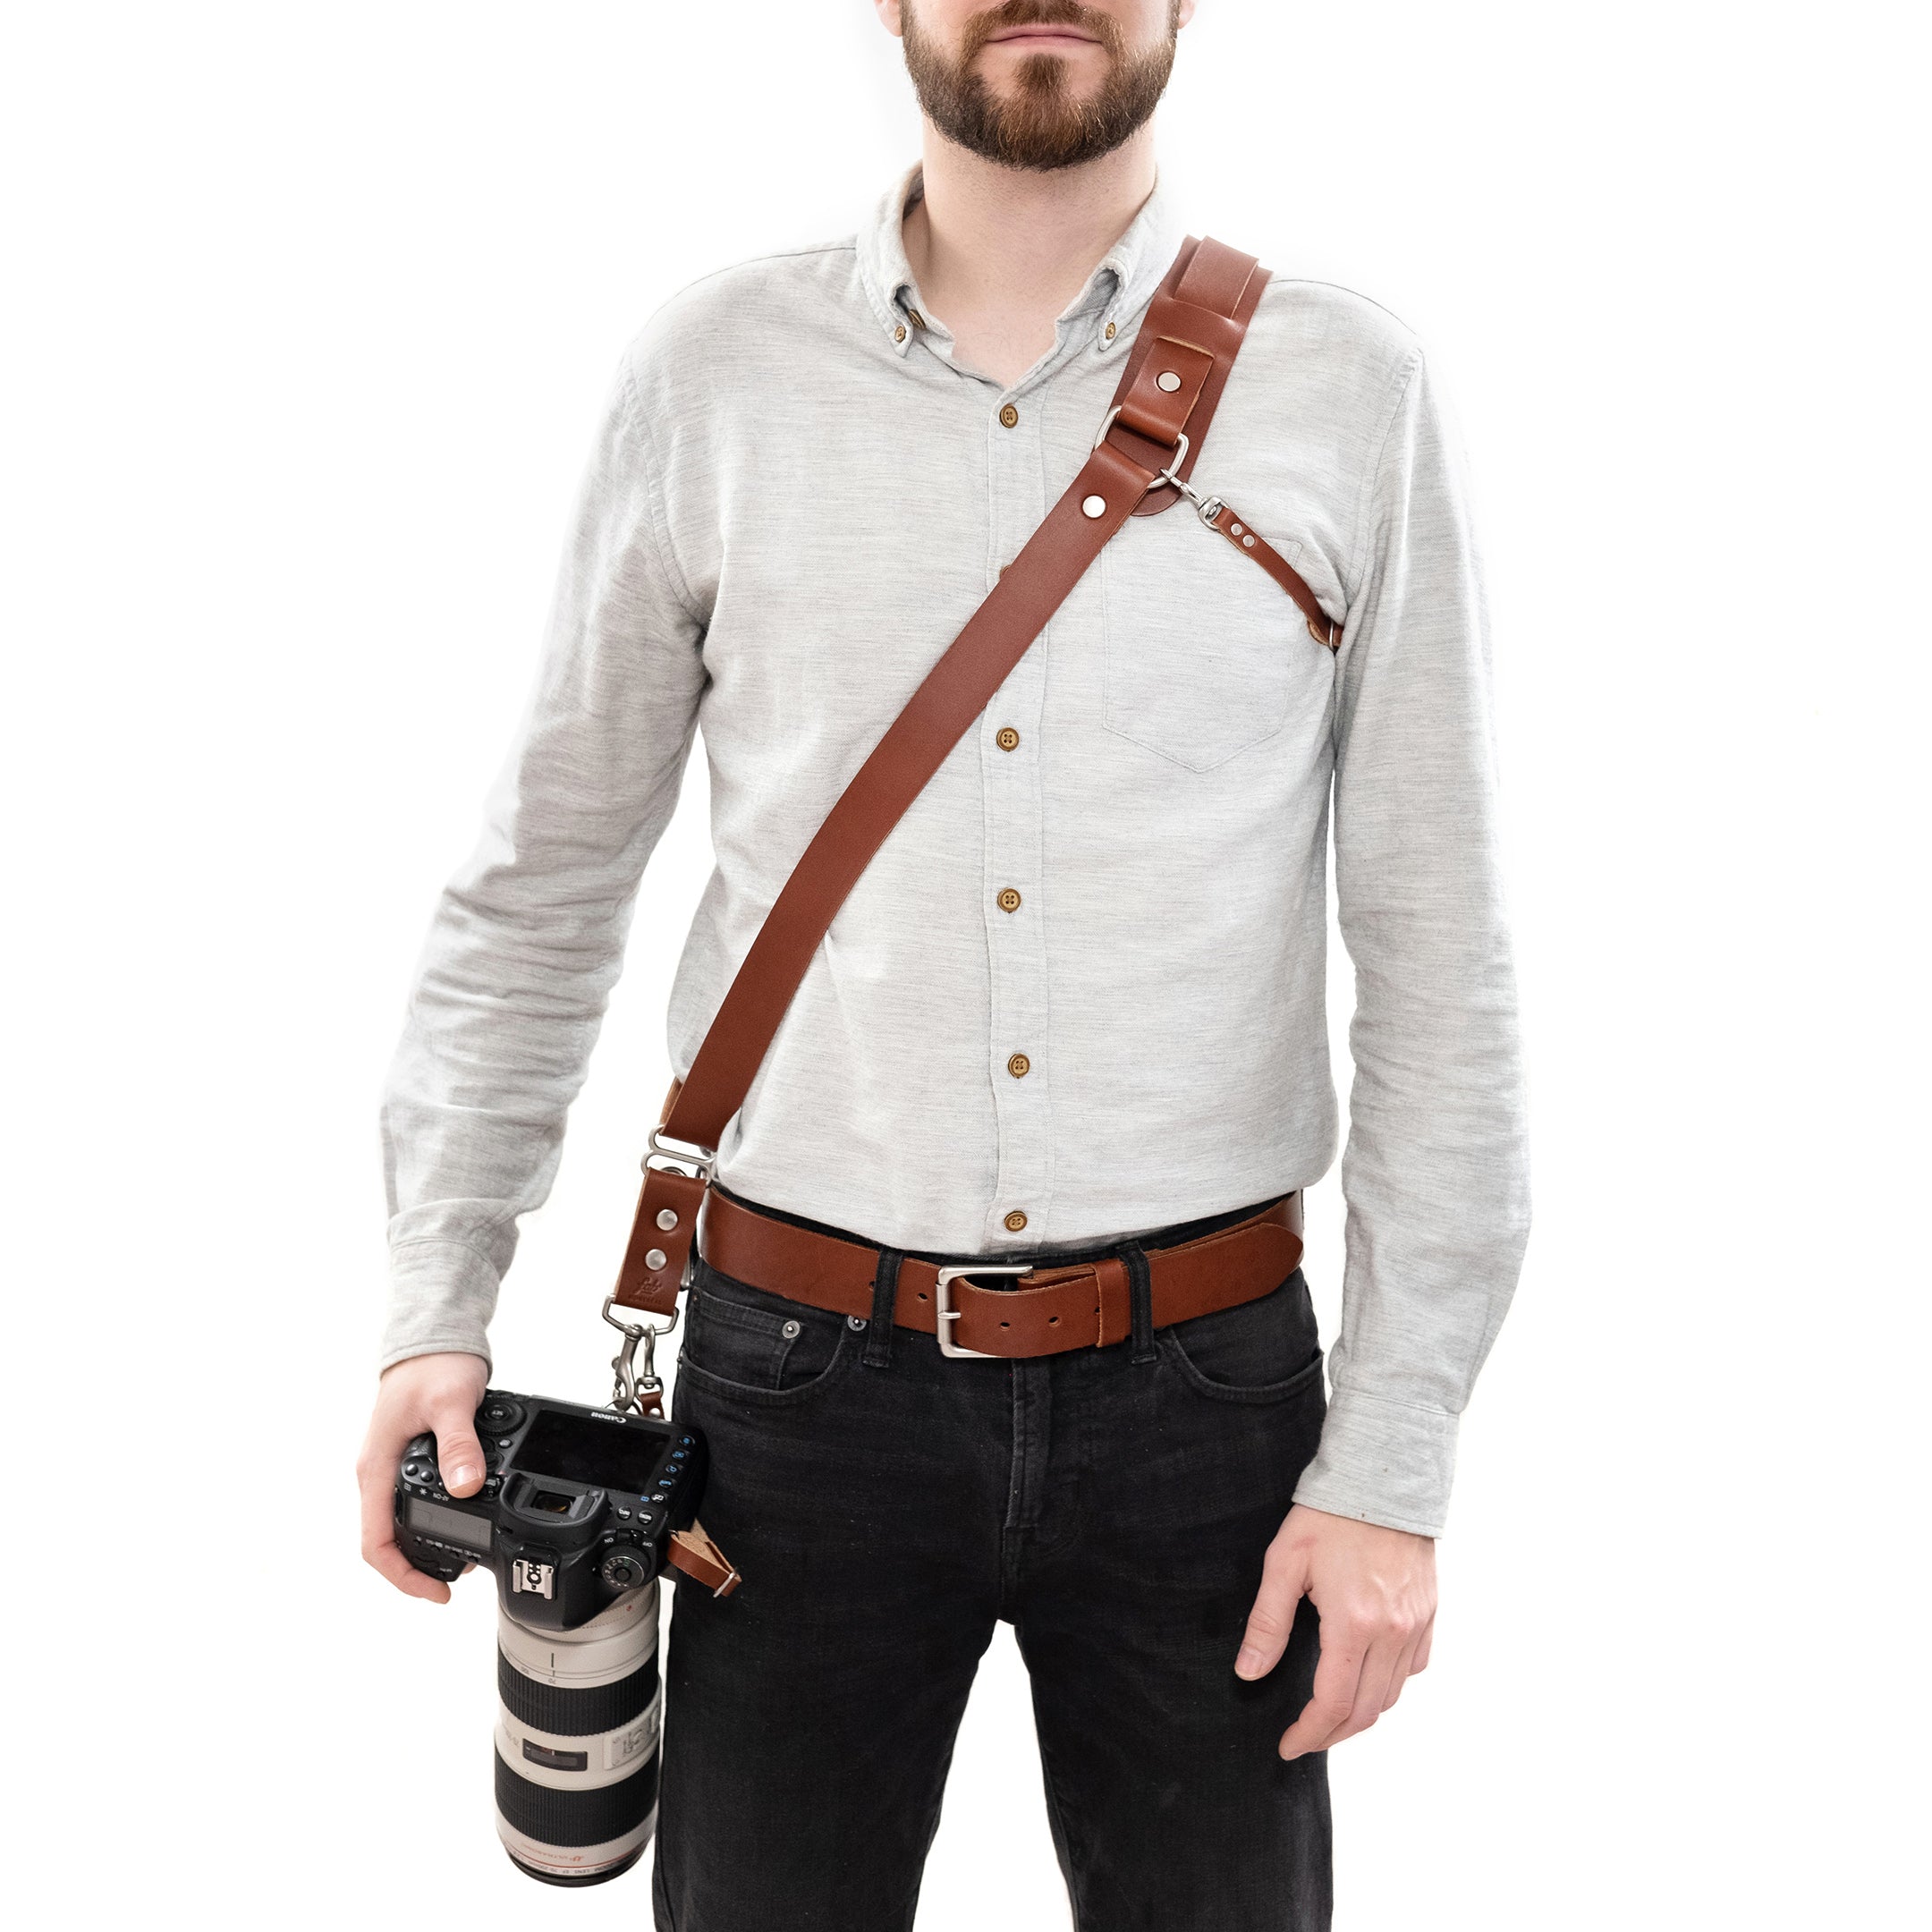 Fab' F16 strap with pad - Brown leather - Size XL